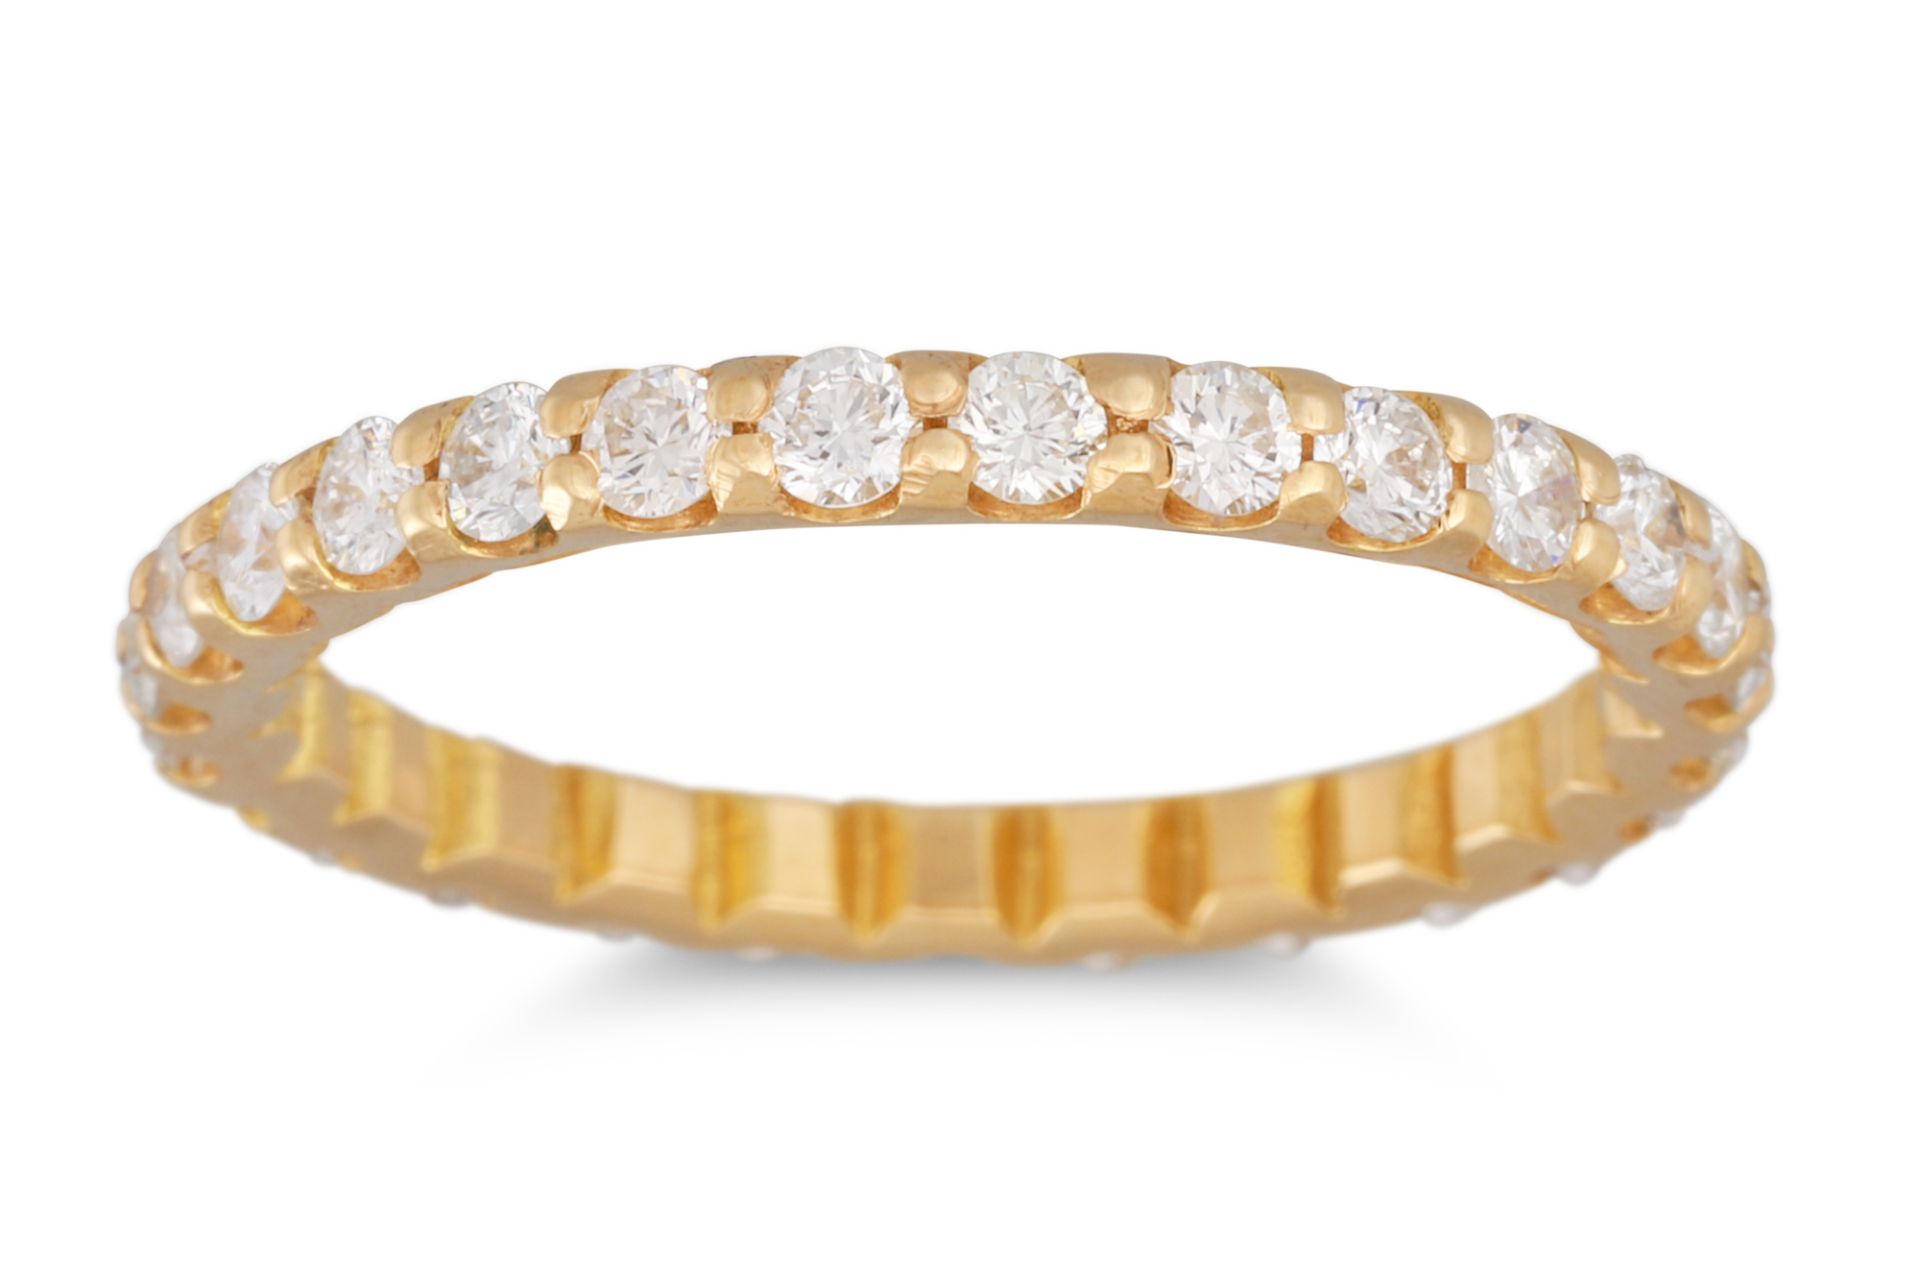 A DIAMOND FULL ETERNITY RING, the brilliant cut diamonds mounted in 18ct yellow gold. Estimated: